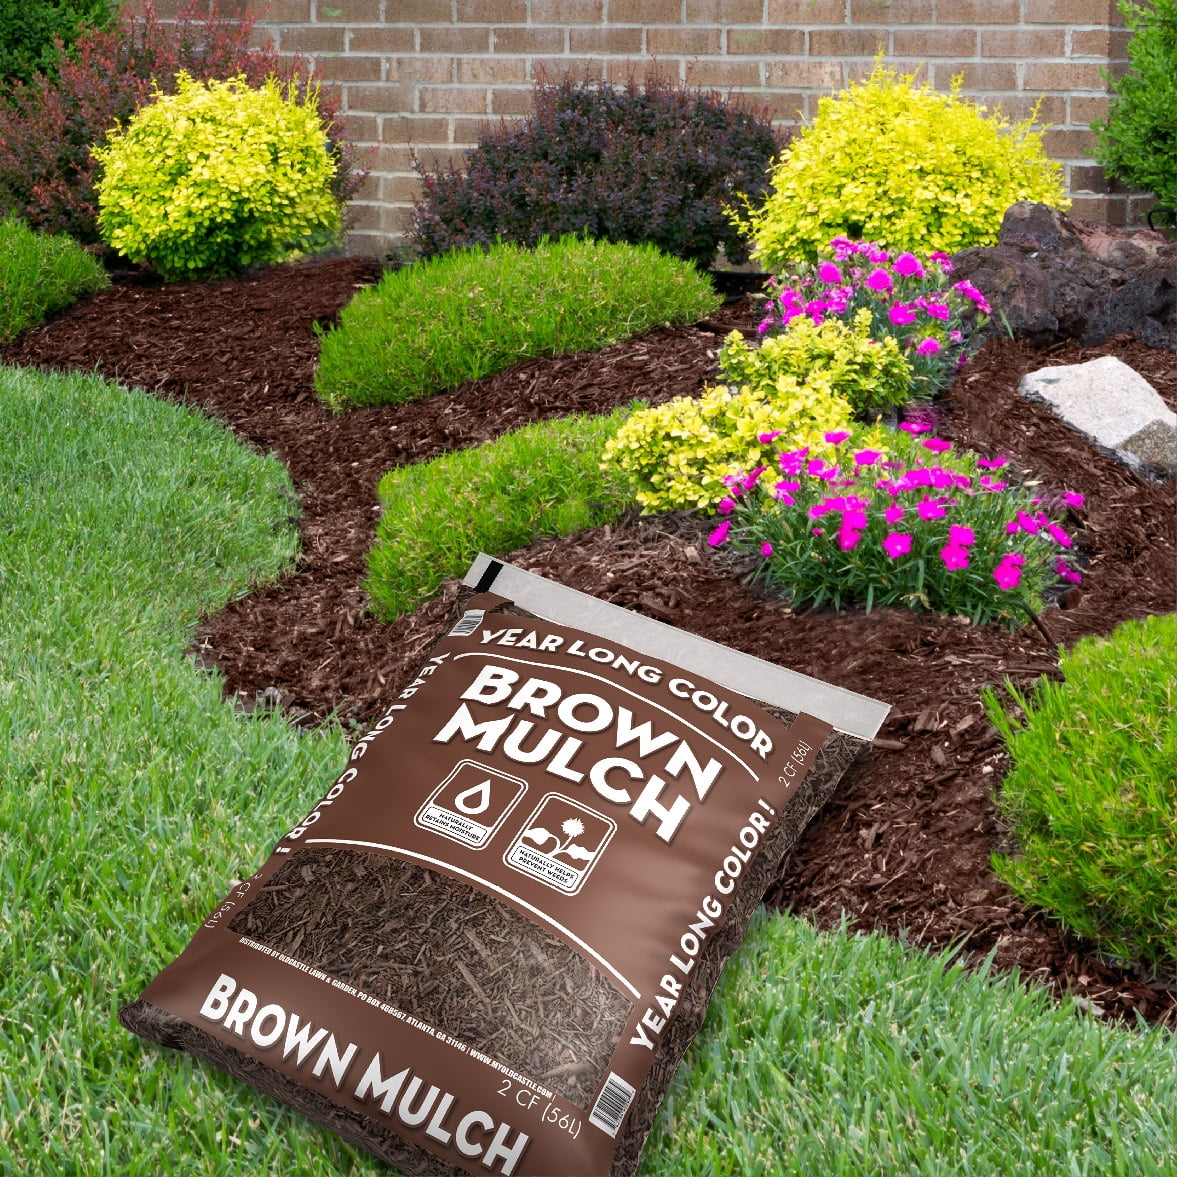 Premium Mulch only 250 at Lowes through 43 My favorite Spring sale